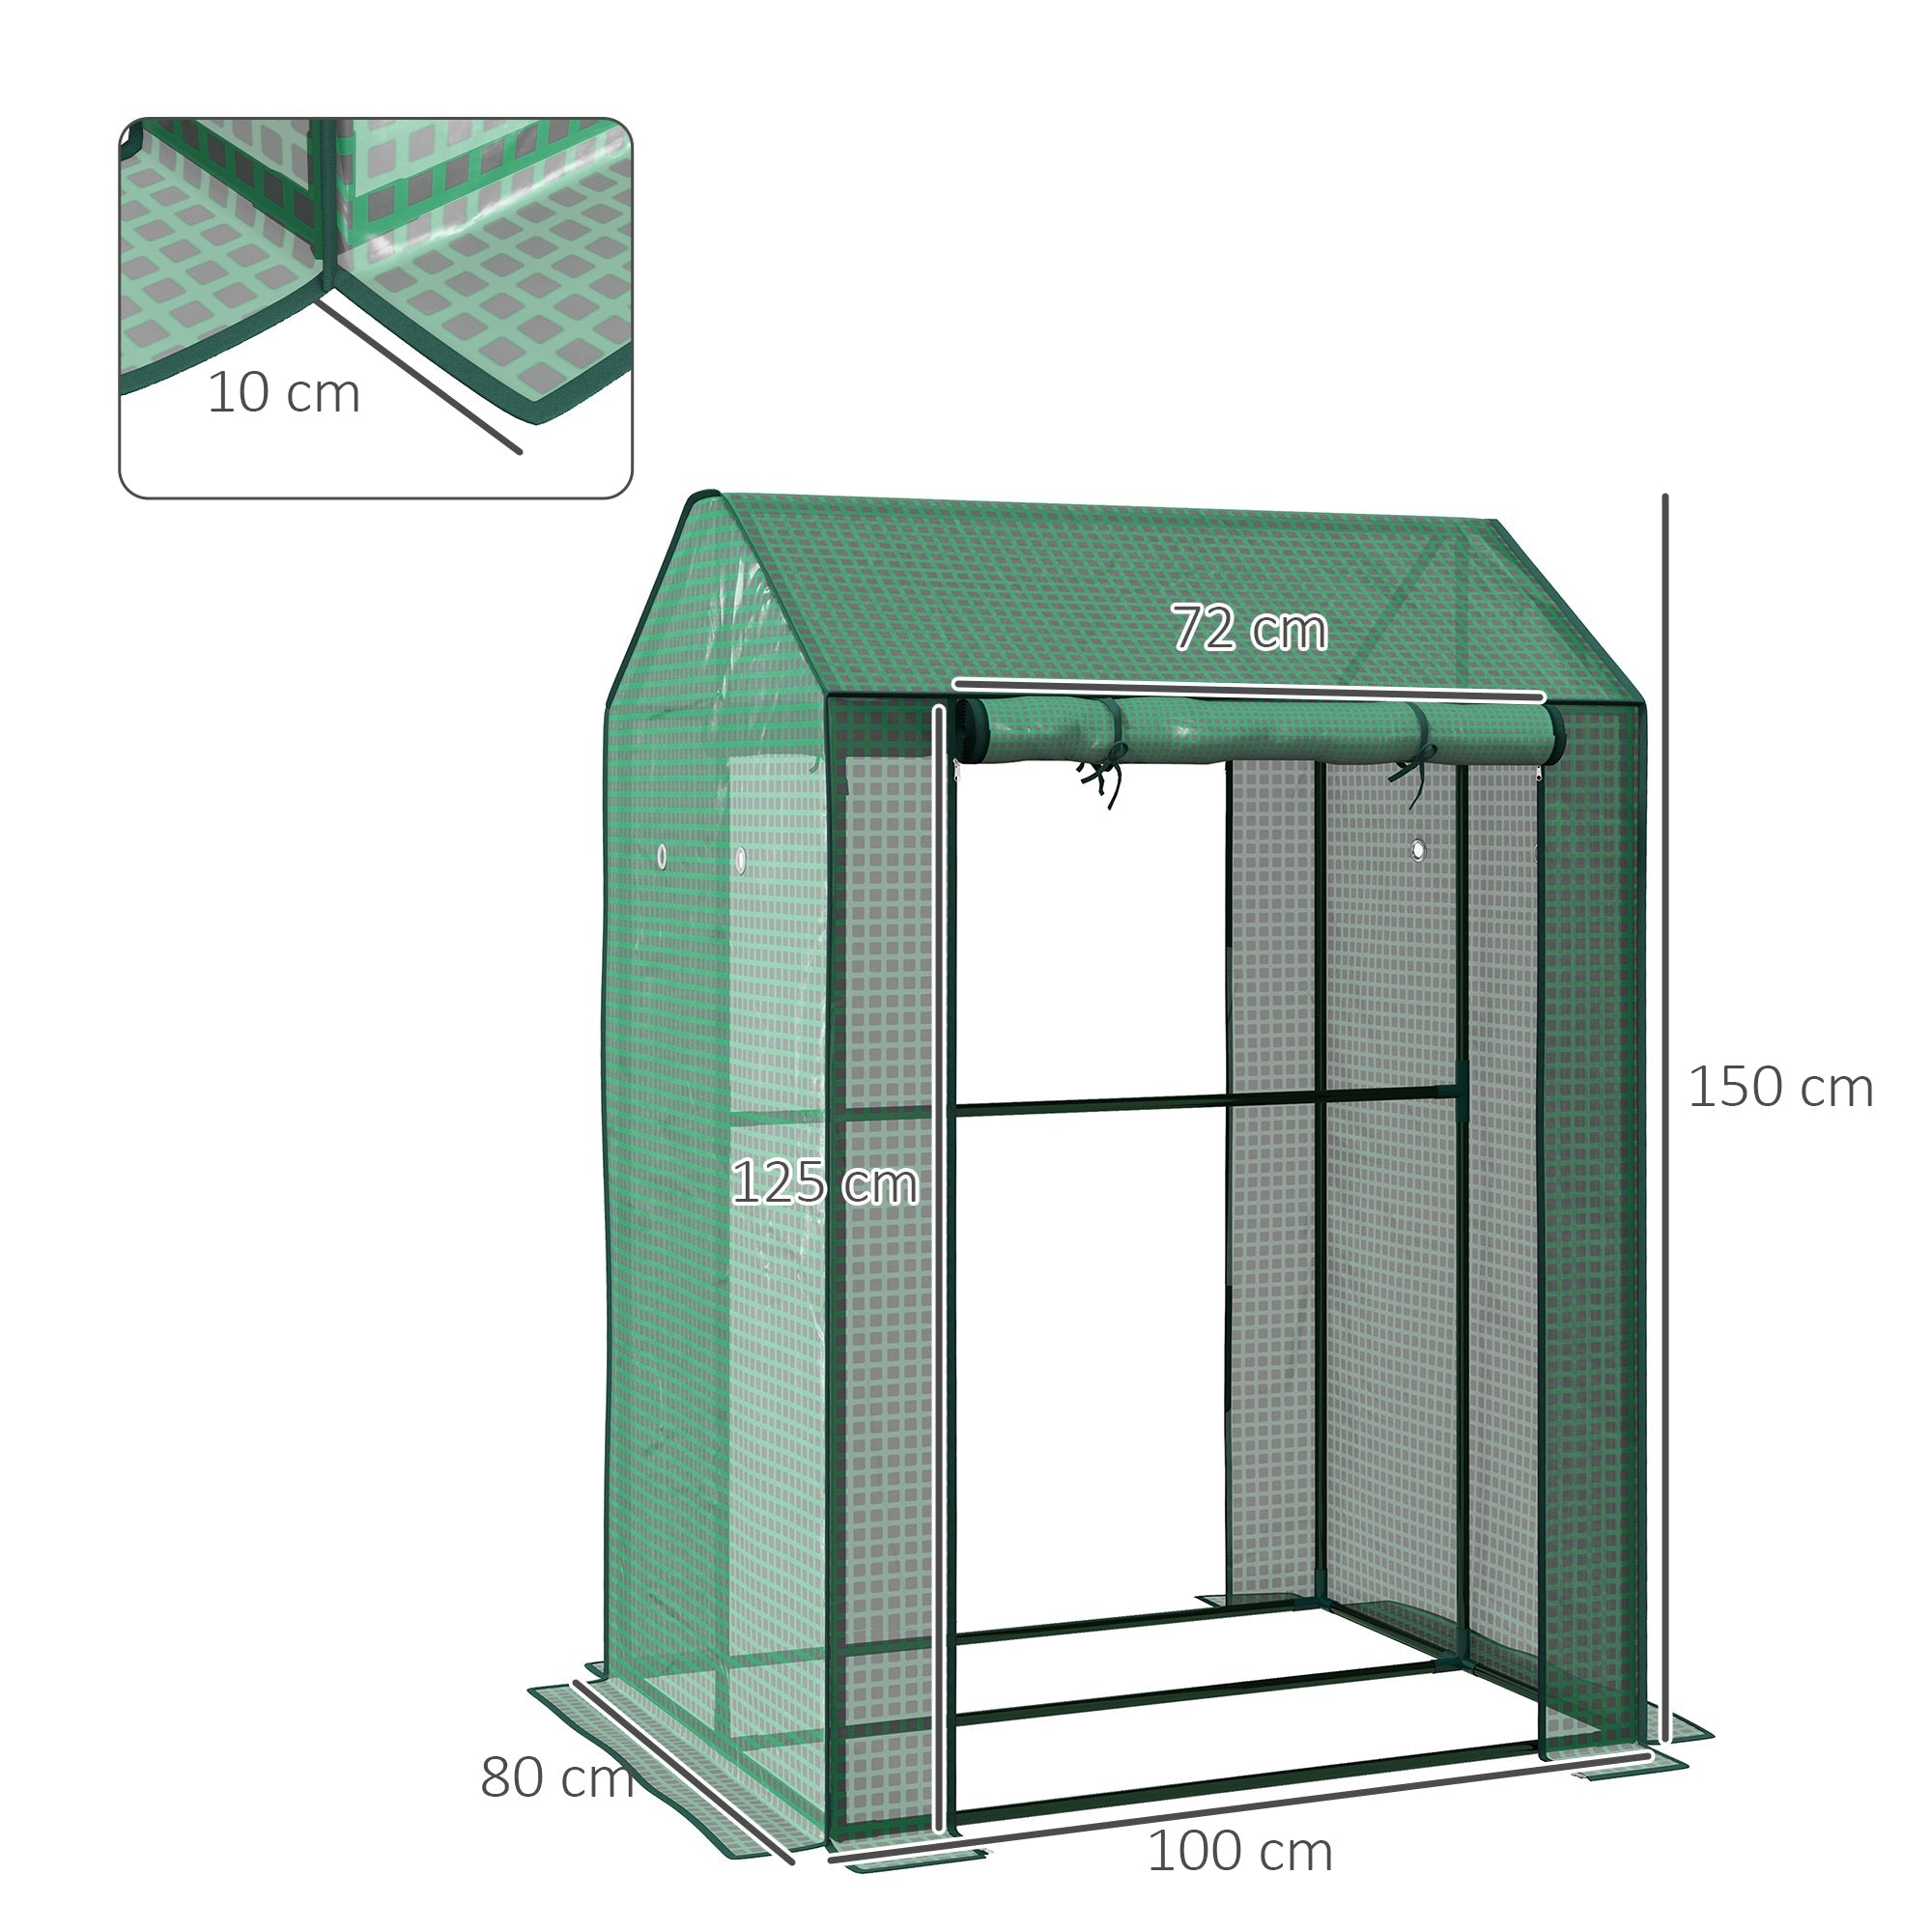 2-Room Green House, Mini Greenhouse with 2 Roll-up Doors, Vent Holes and Reinforced Cover, 100 x 80 x 150cm-2